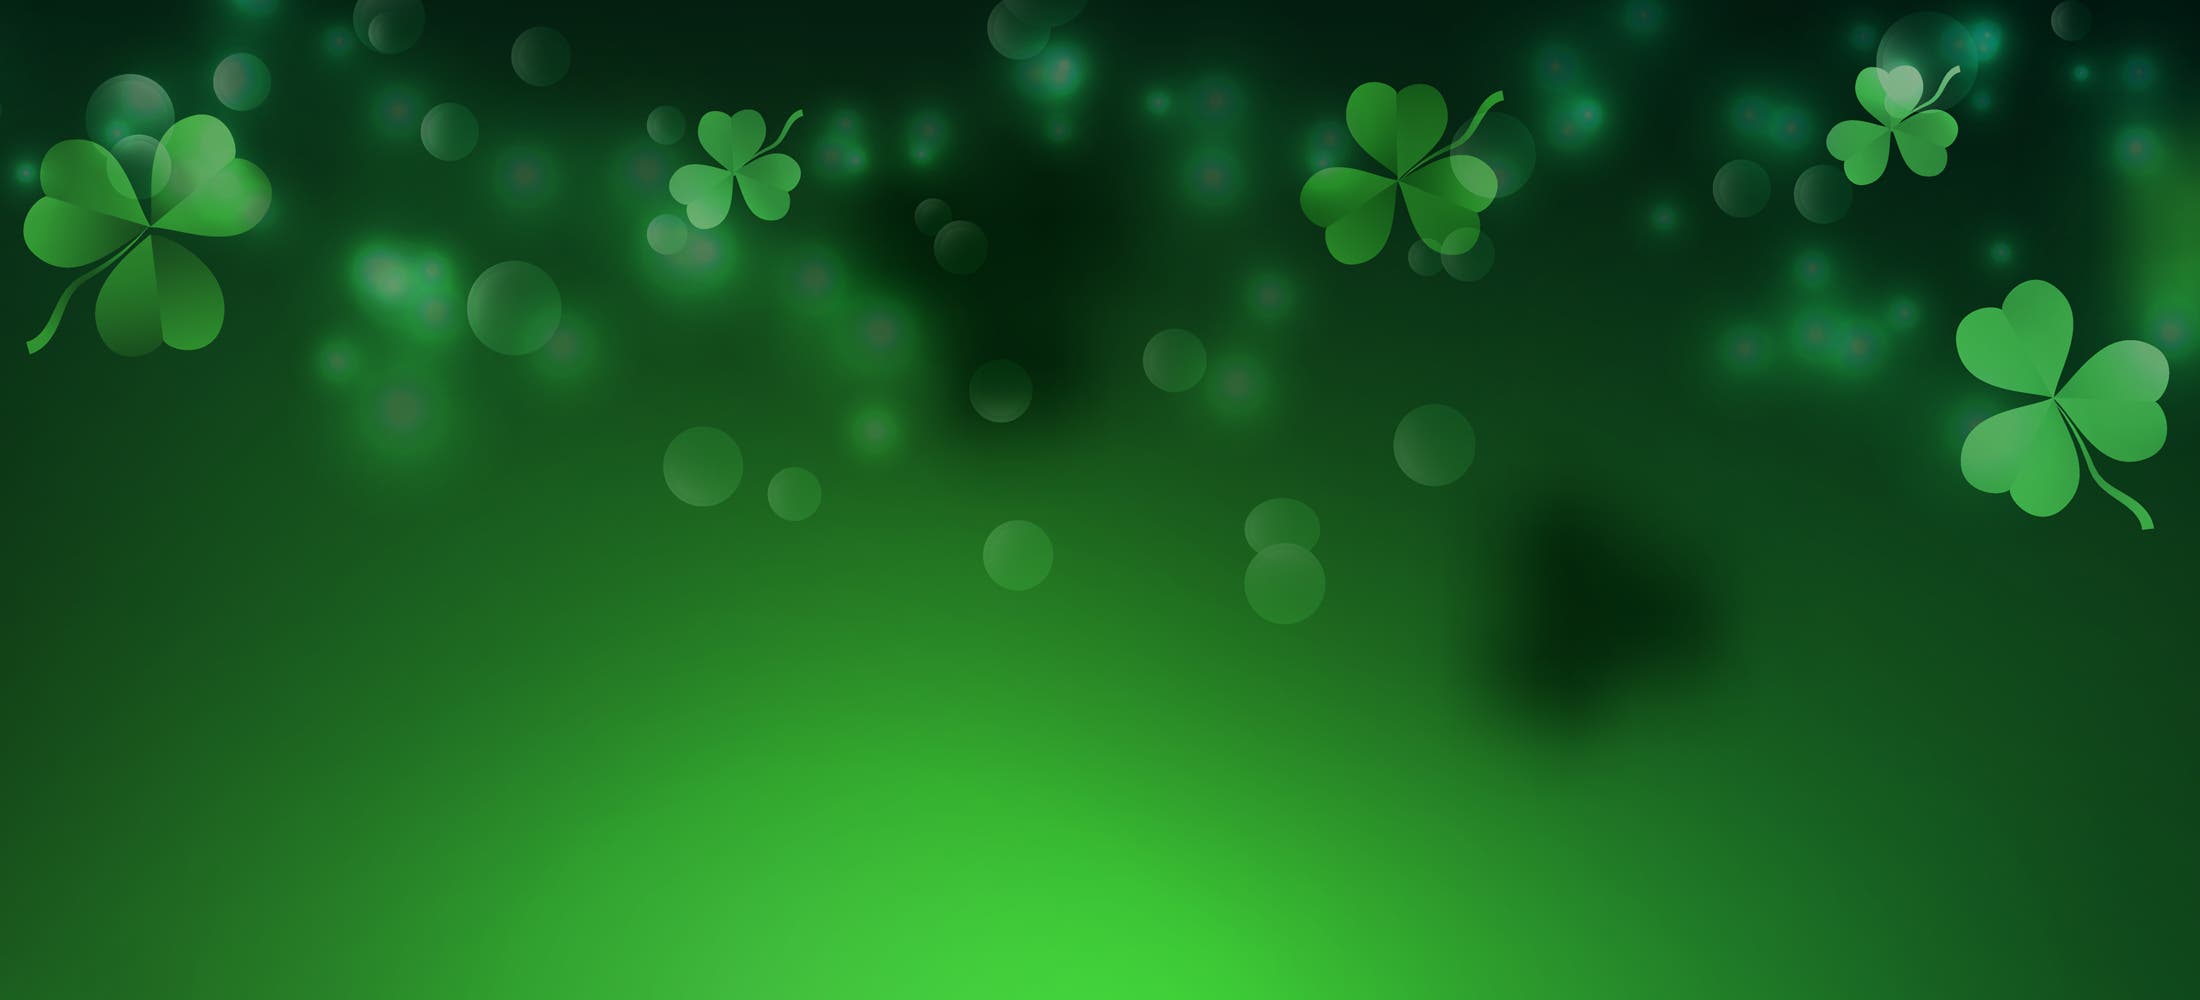 Surprising Facts about St. Patrick's Day